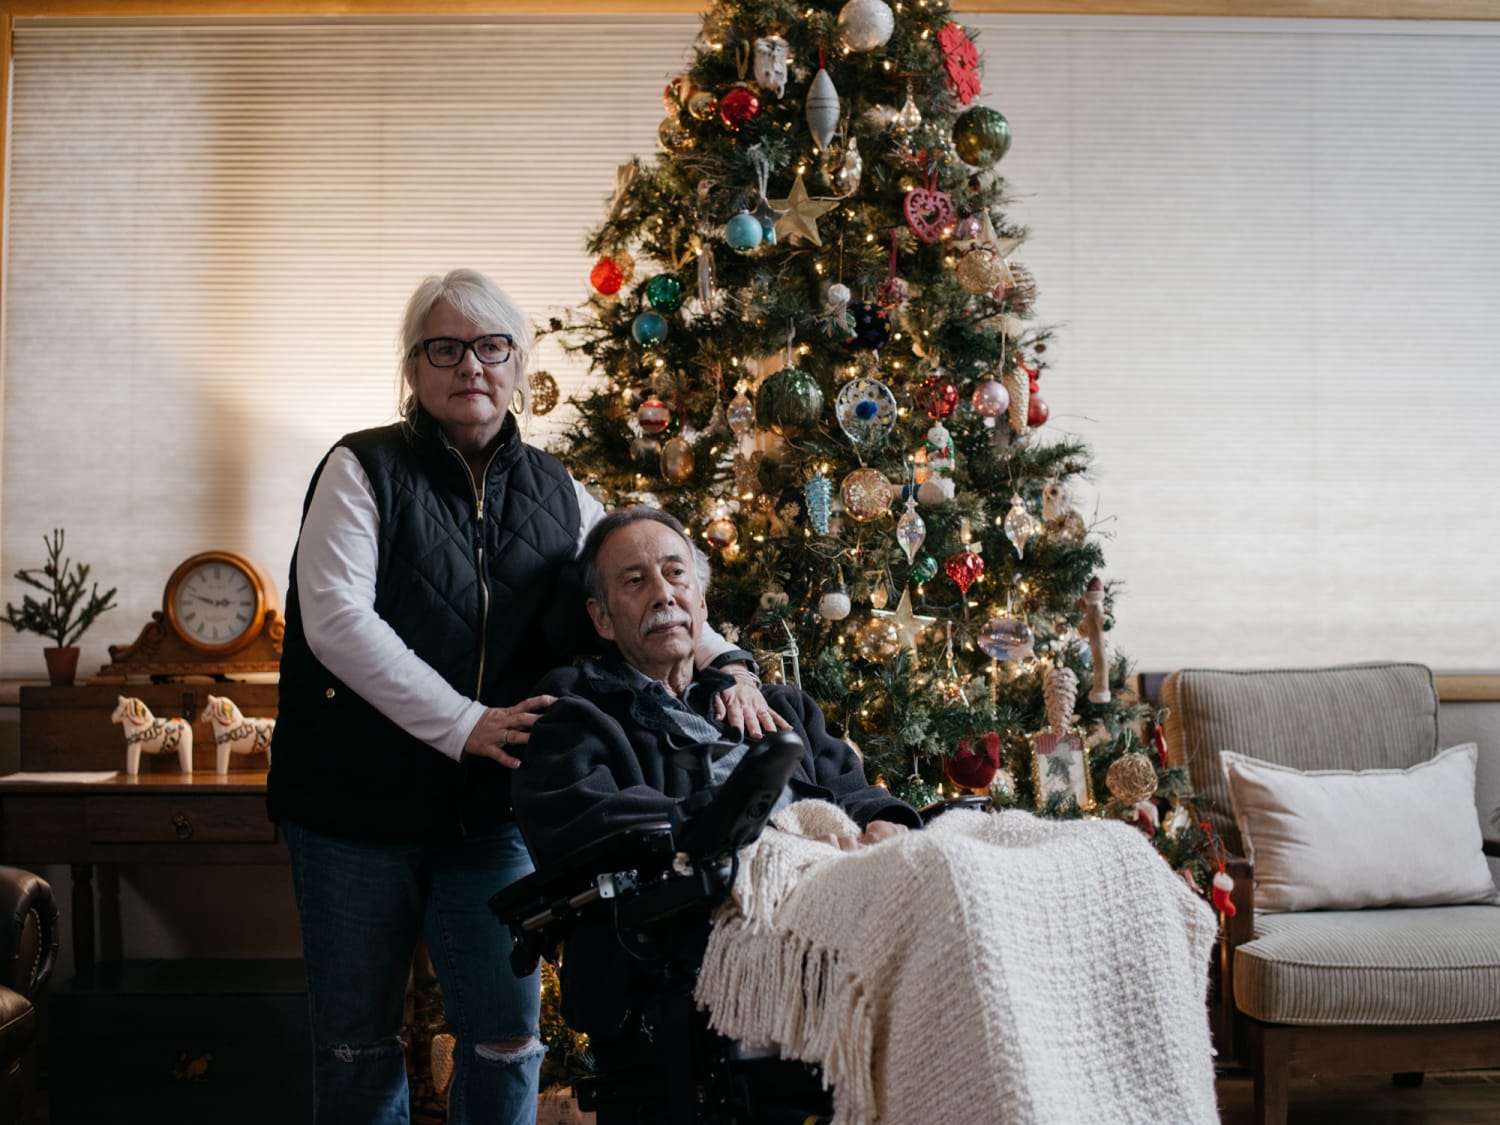 An ALS patient's dilemma: End his own life, or die slowly of the